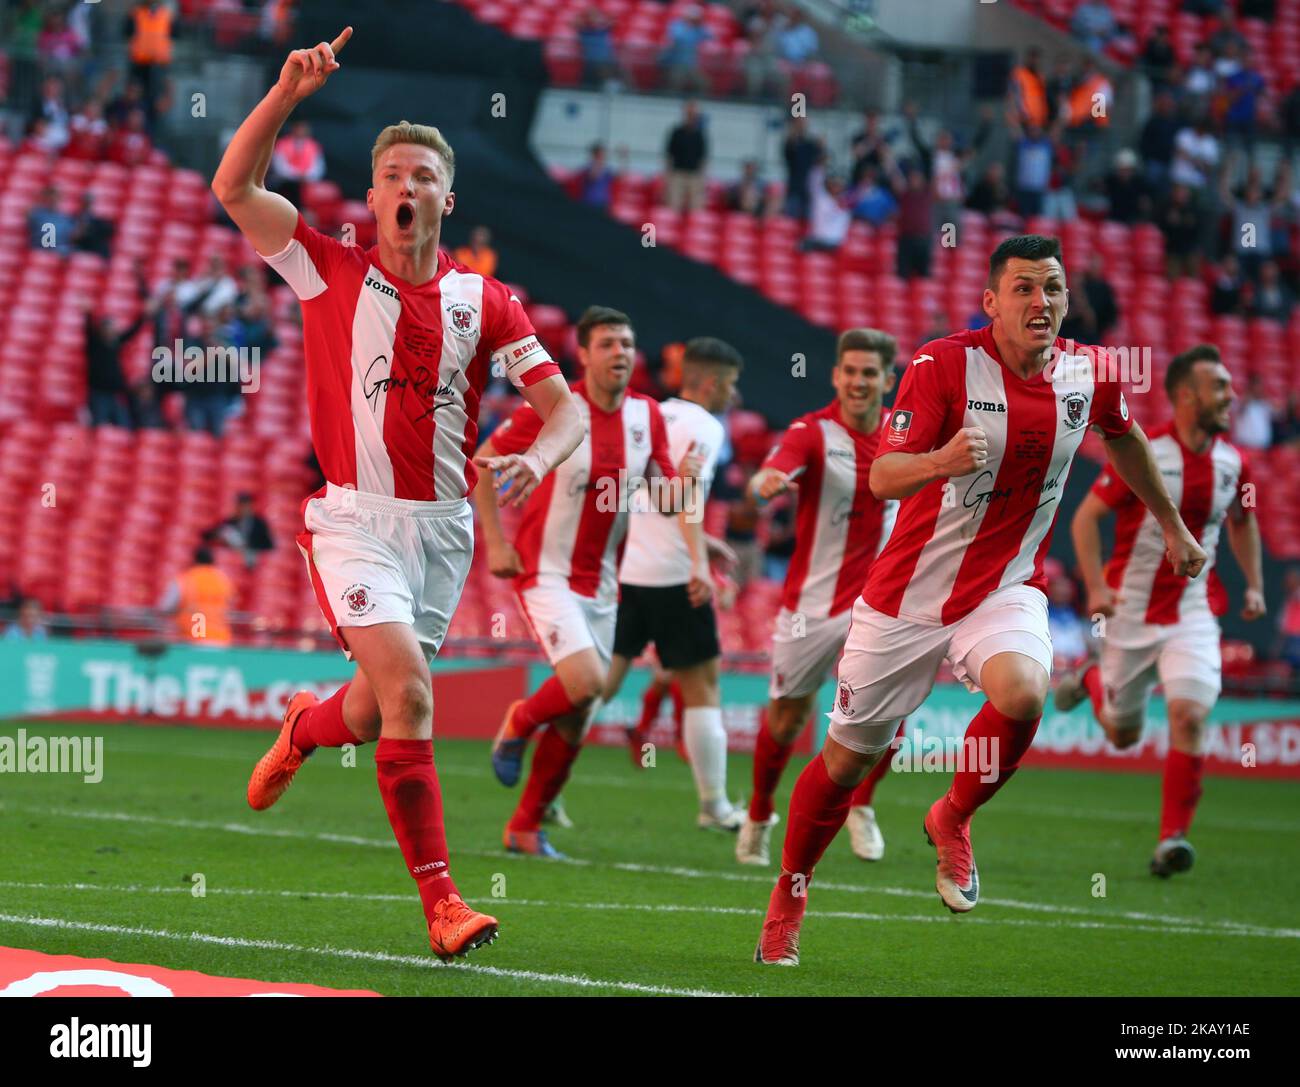 Gareth (Gaz) Dean of Brackley Town celebrates scoring his sides first goal during The Buildbase FA Trophy Final match between Brackley Town and Bromley at Wembley, London, England on 20 May 2018. (Photo by Kieran Galvin/NurPhoto) Stock Photo